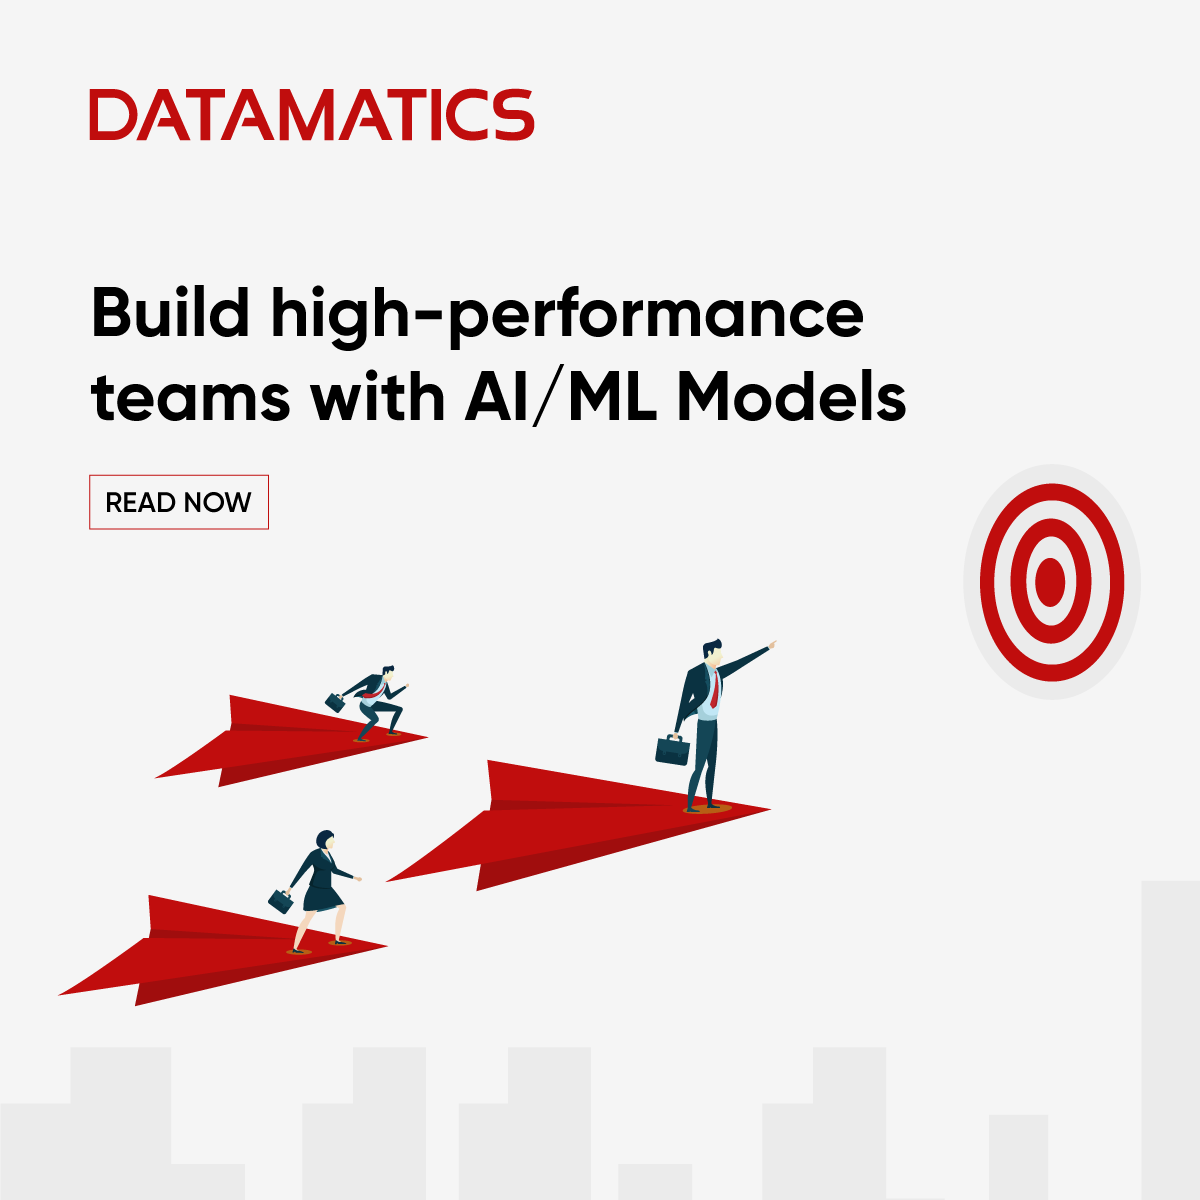 Build high-performance teams with AI/ML Models